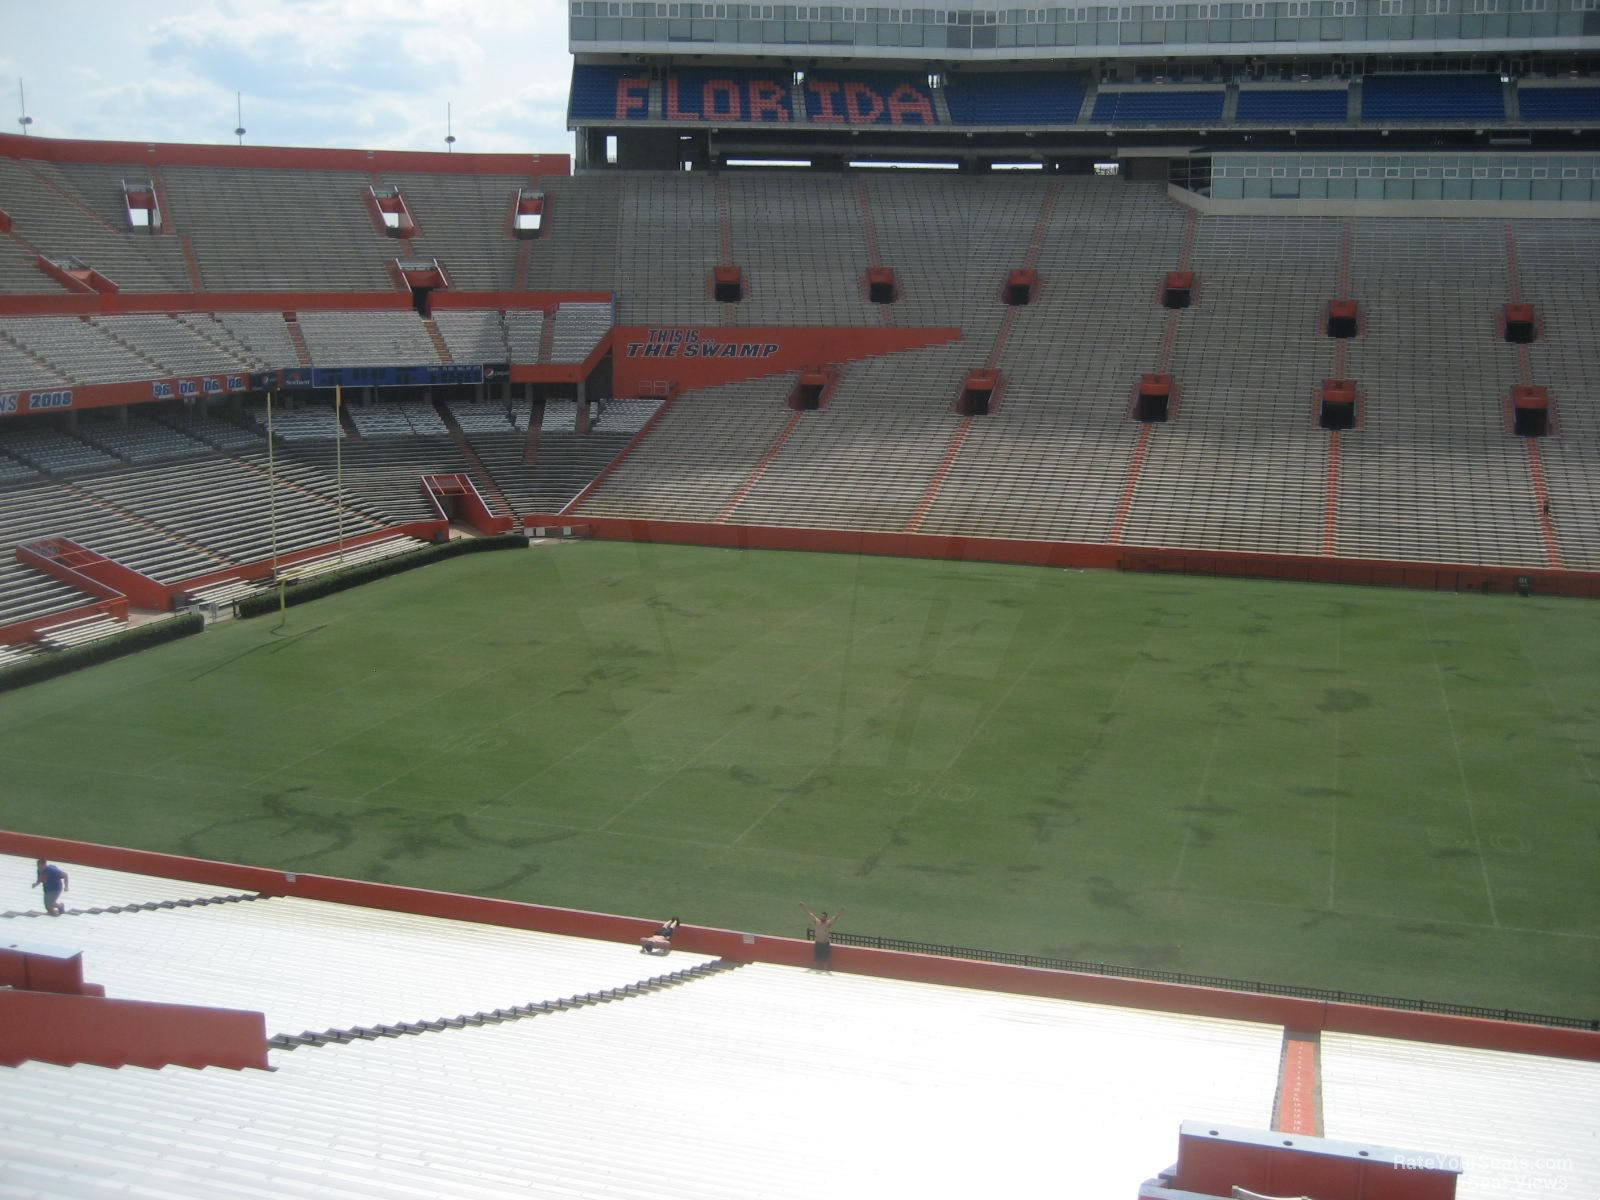 section 37, row 58 seat view  - ben hill griffin stadium